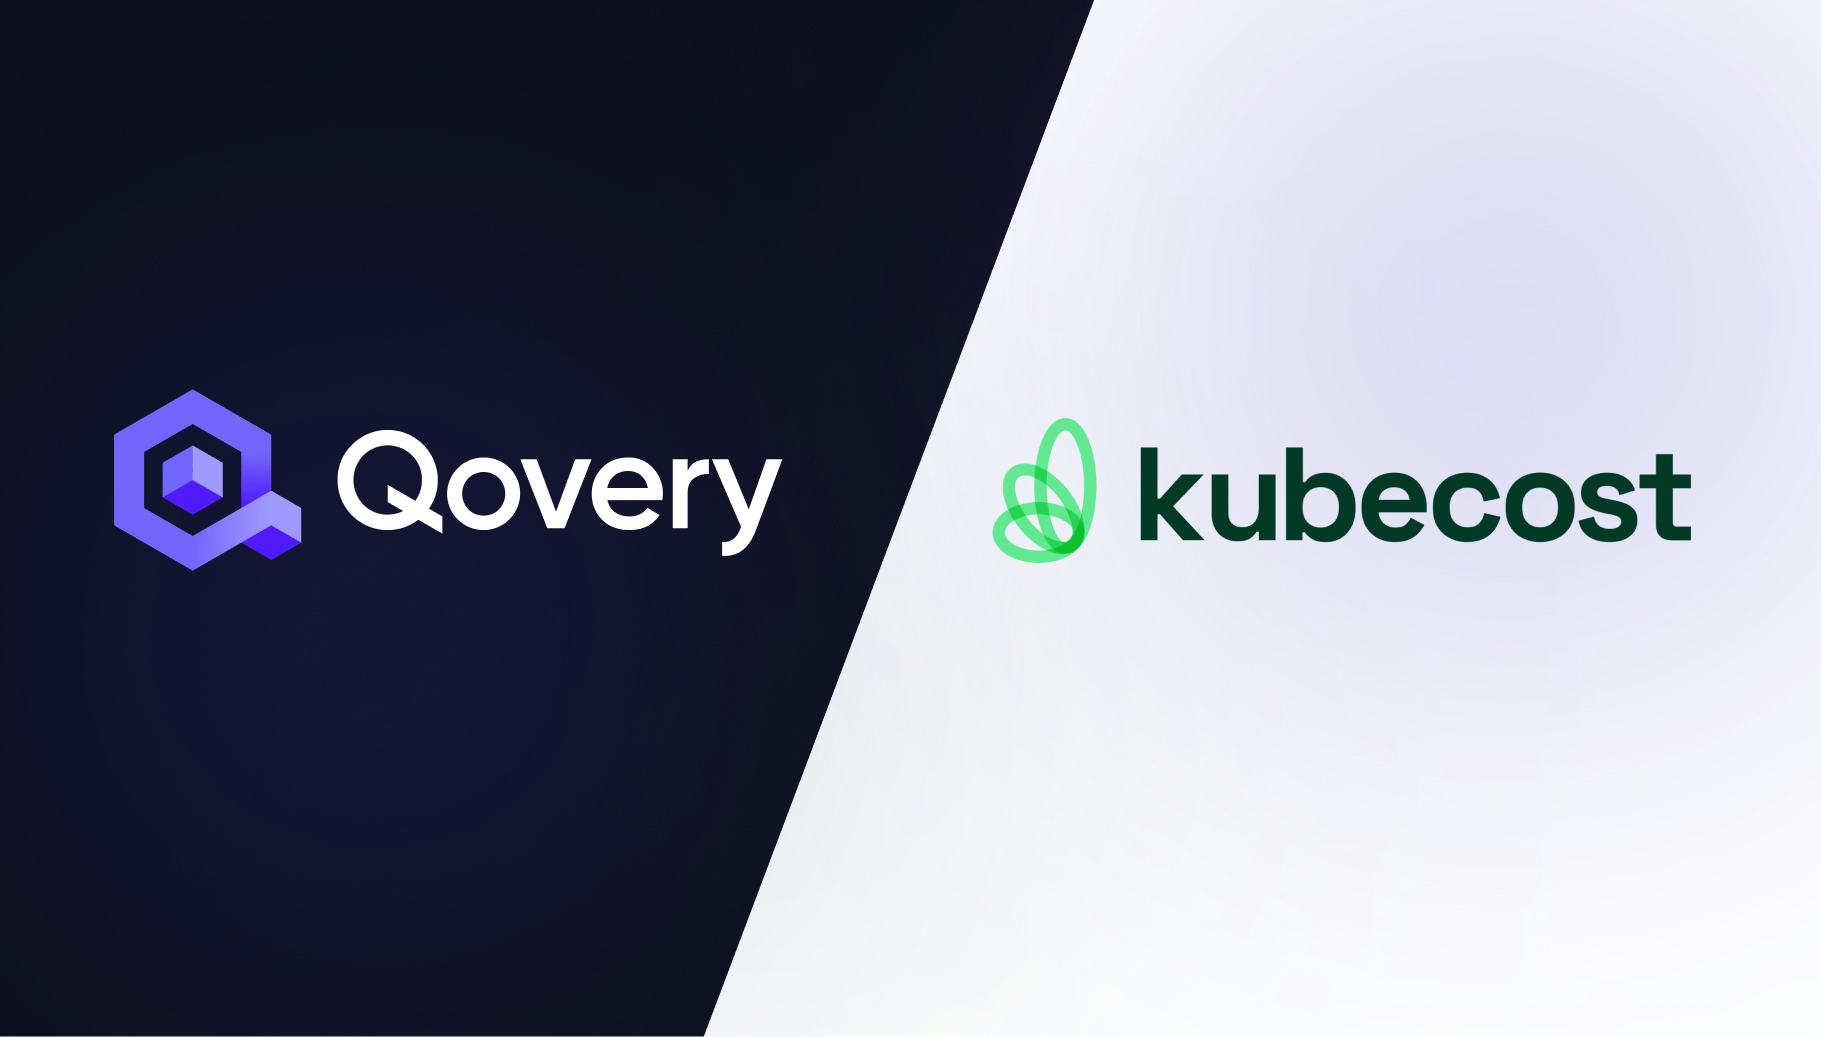 Kubecost and Qovery Team up to Offer Cost Monitoring for DevOps Teams - Qovery